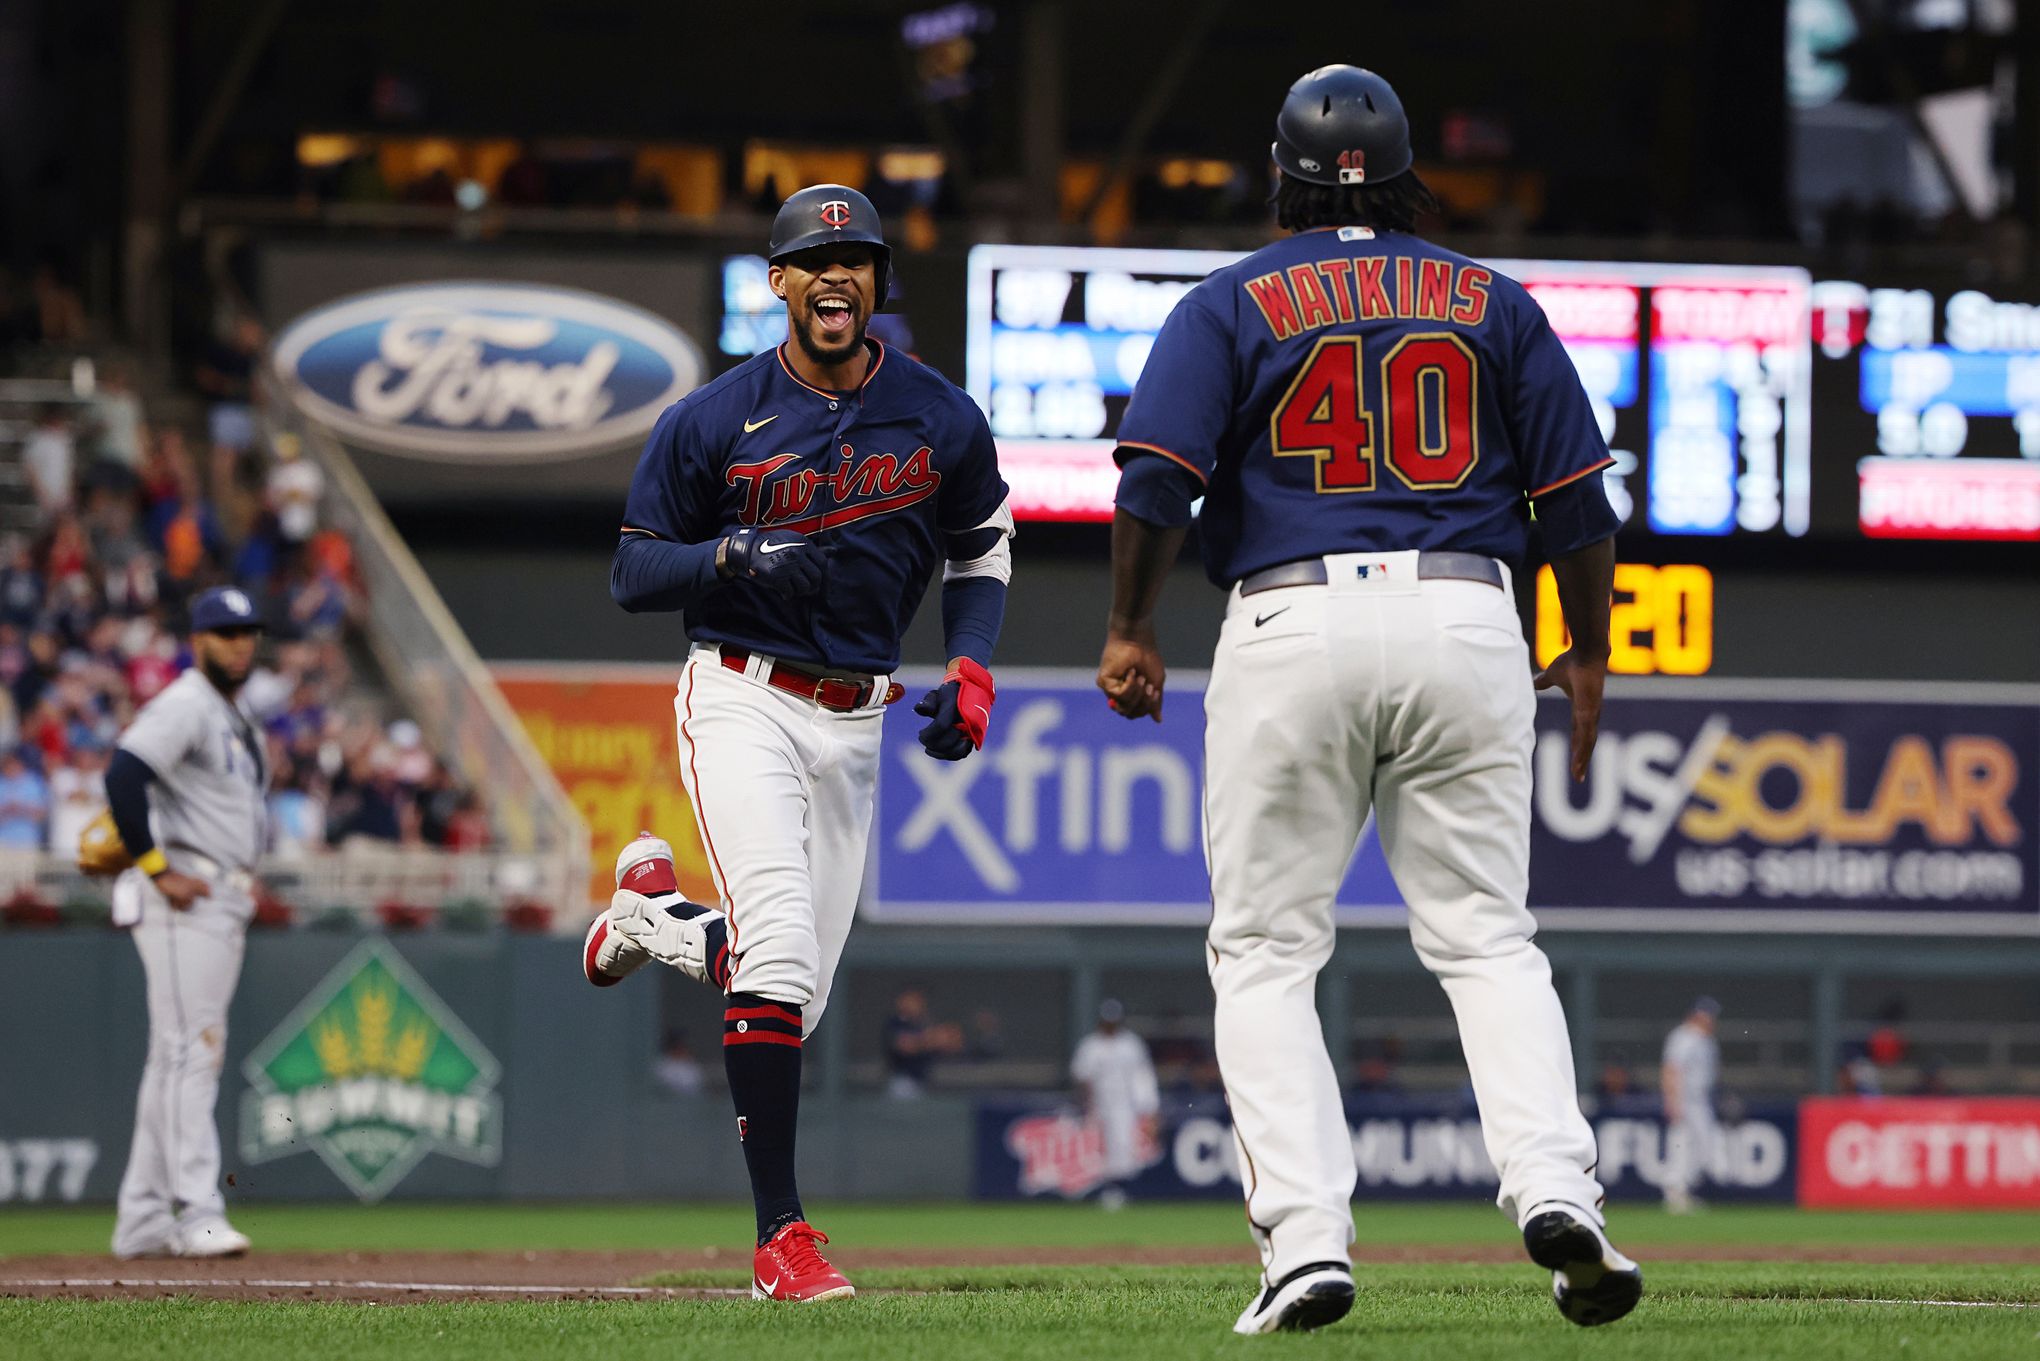 Byron Buxton hits two homers in win over Rays